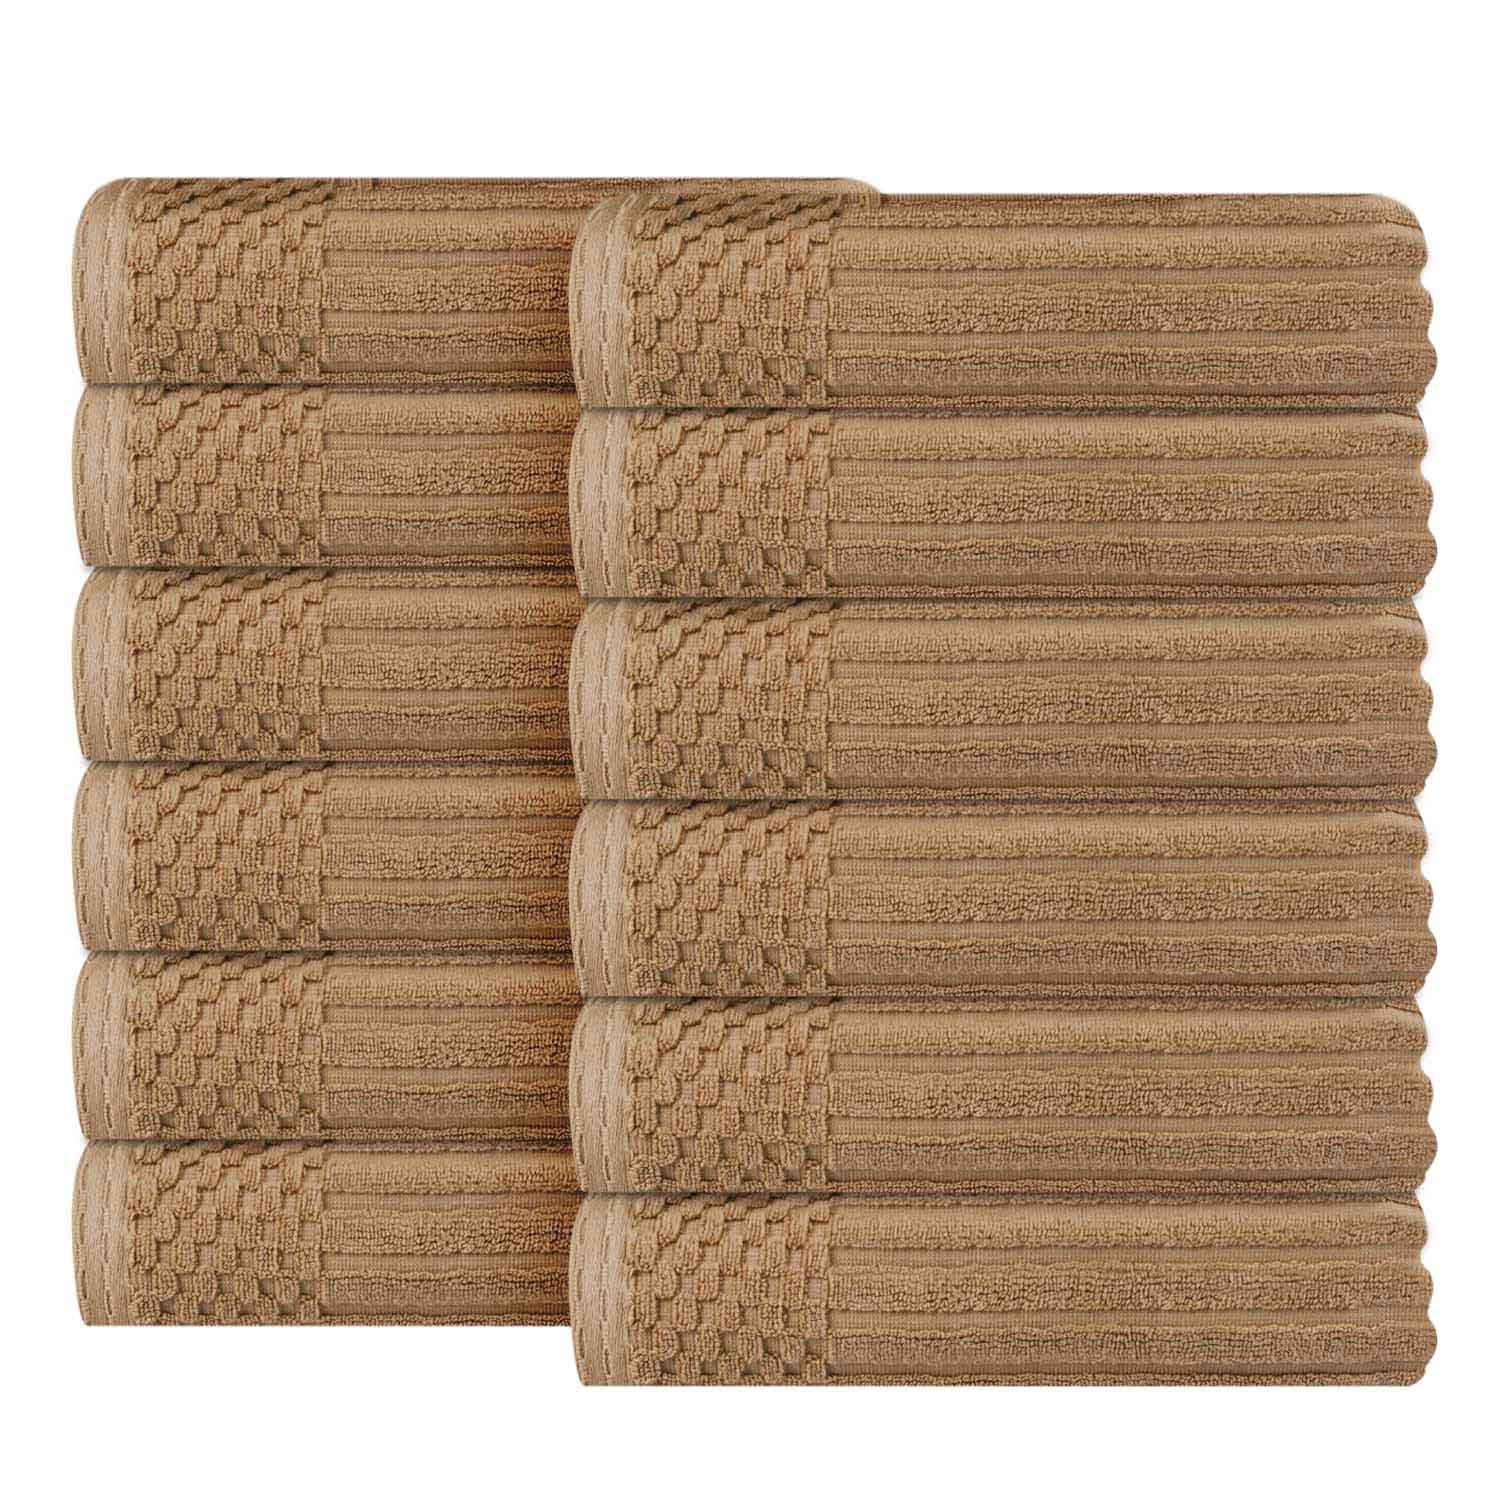 Soho Ribbed Cotton Absorbent Face Towel / Washcloth Set of 12 - Coffee